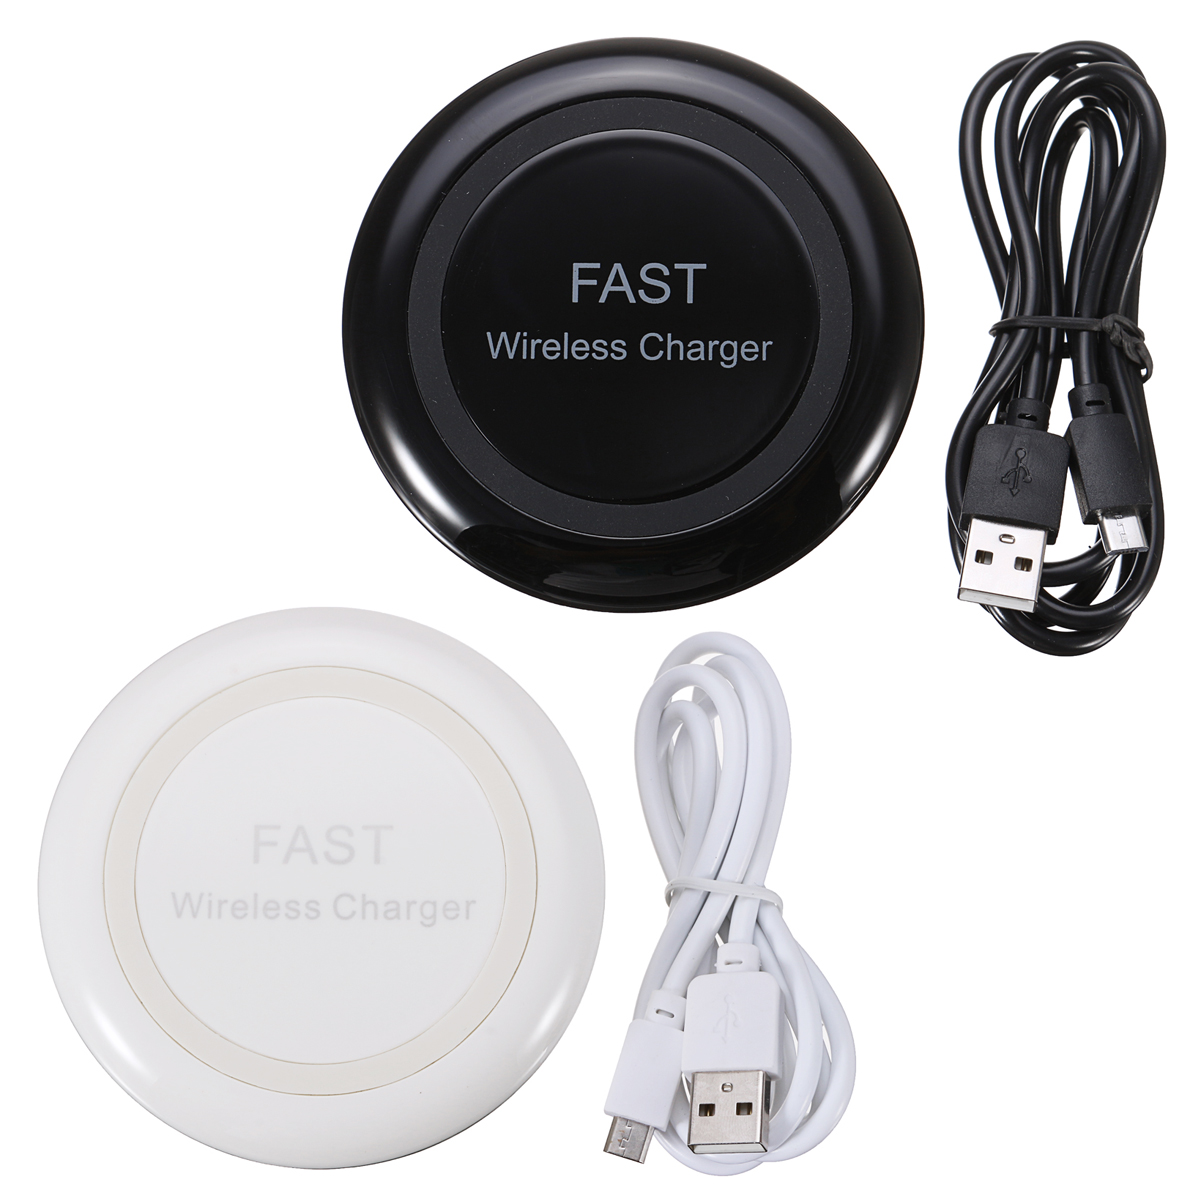 Bakeey-Qi-Wireless-Fast-Charger-With-LED-Indicator-For-iPhone-X-8Plus-Samsung-S7-S8-Note-8-1217829-8